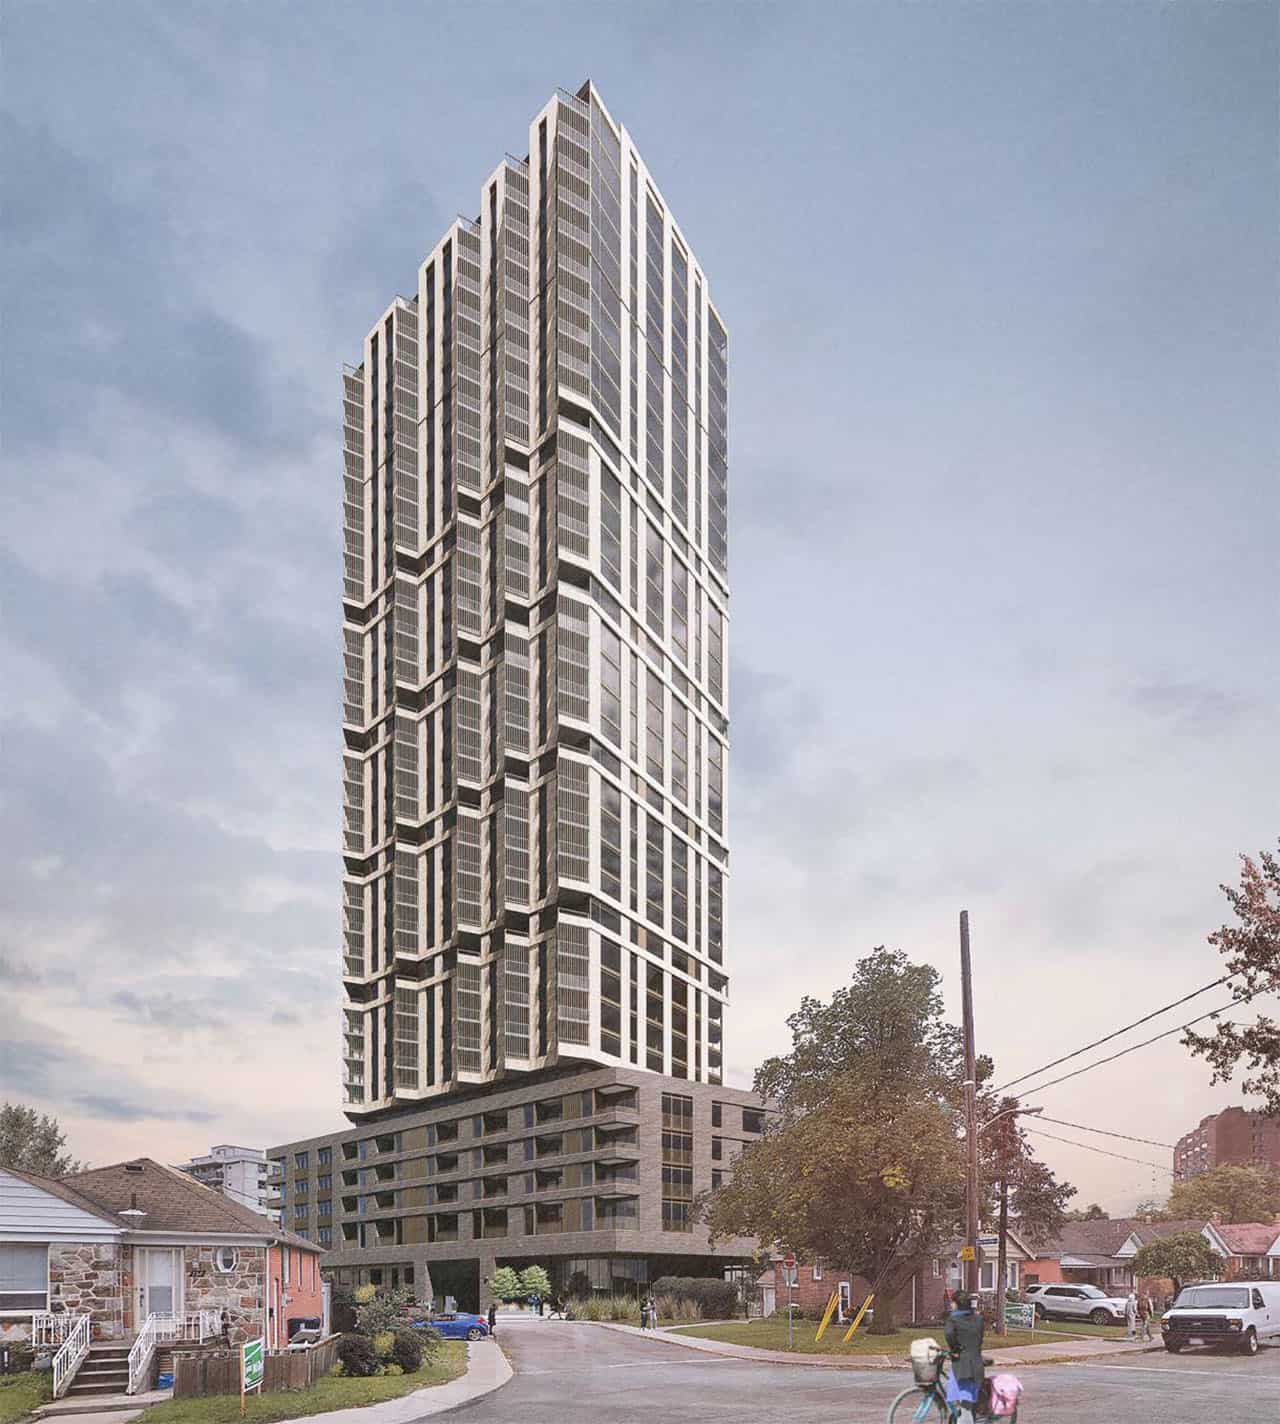 632 Northcliffe Blvd is a new high rise condo complex by Stanford Homes located in 632 Northcliffe Blvd, York, Toronto, ON.